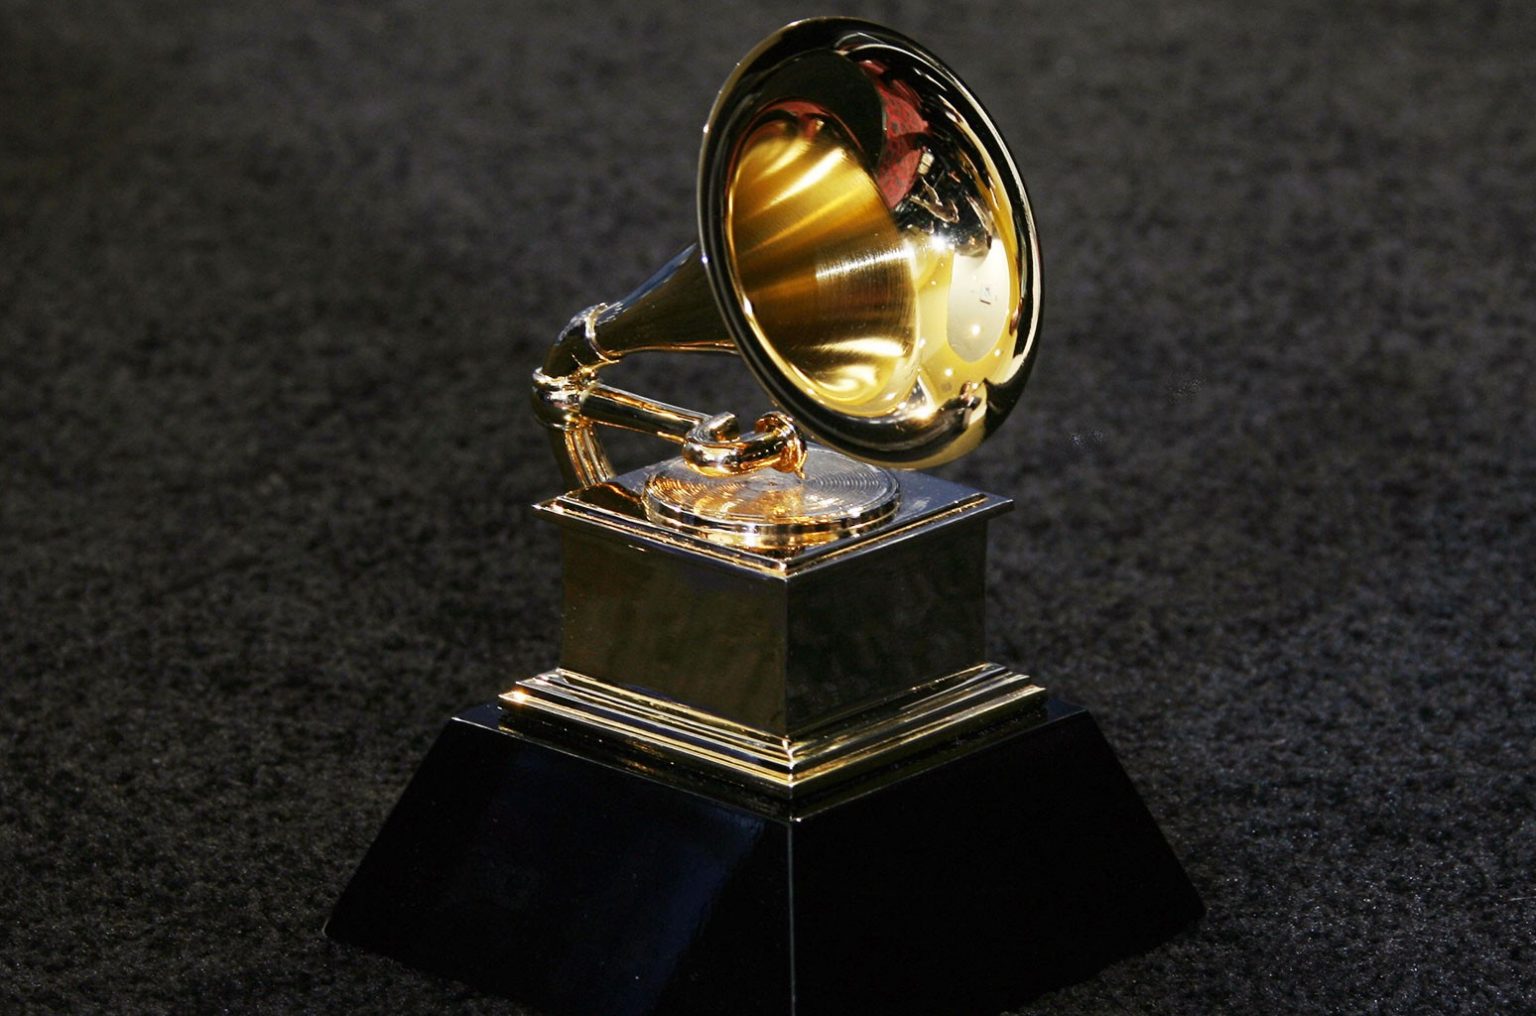 Submissions For 64th Annual Grammy Awards Are Underway DancehallMag